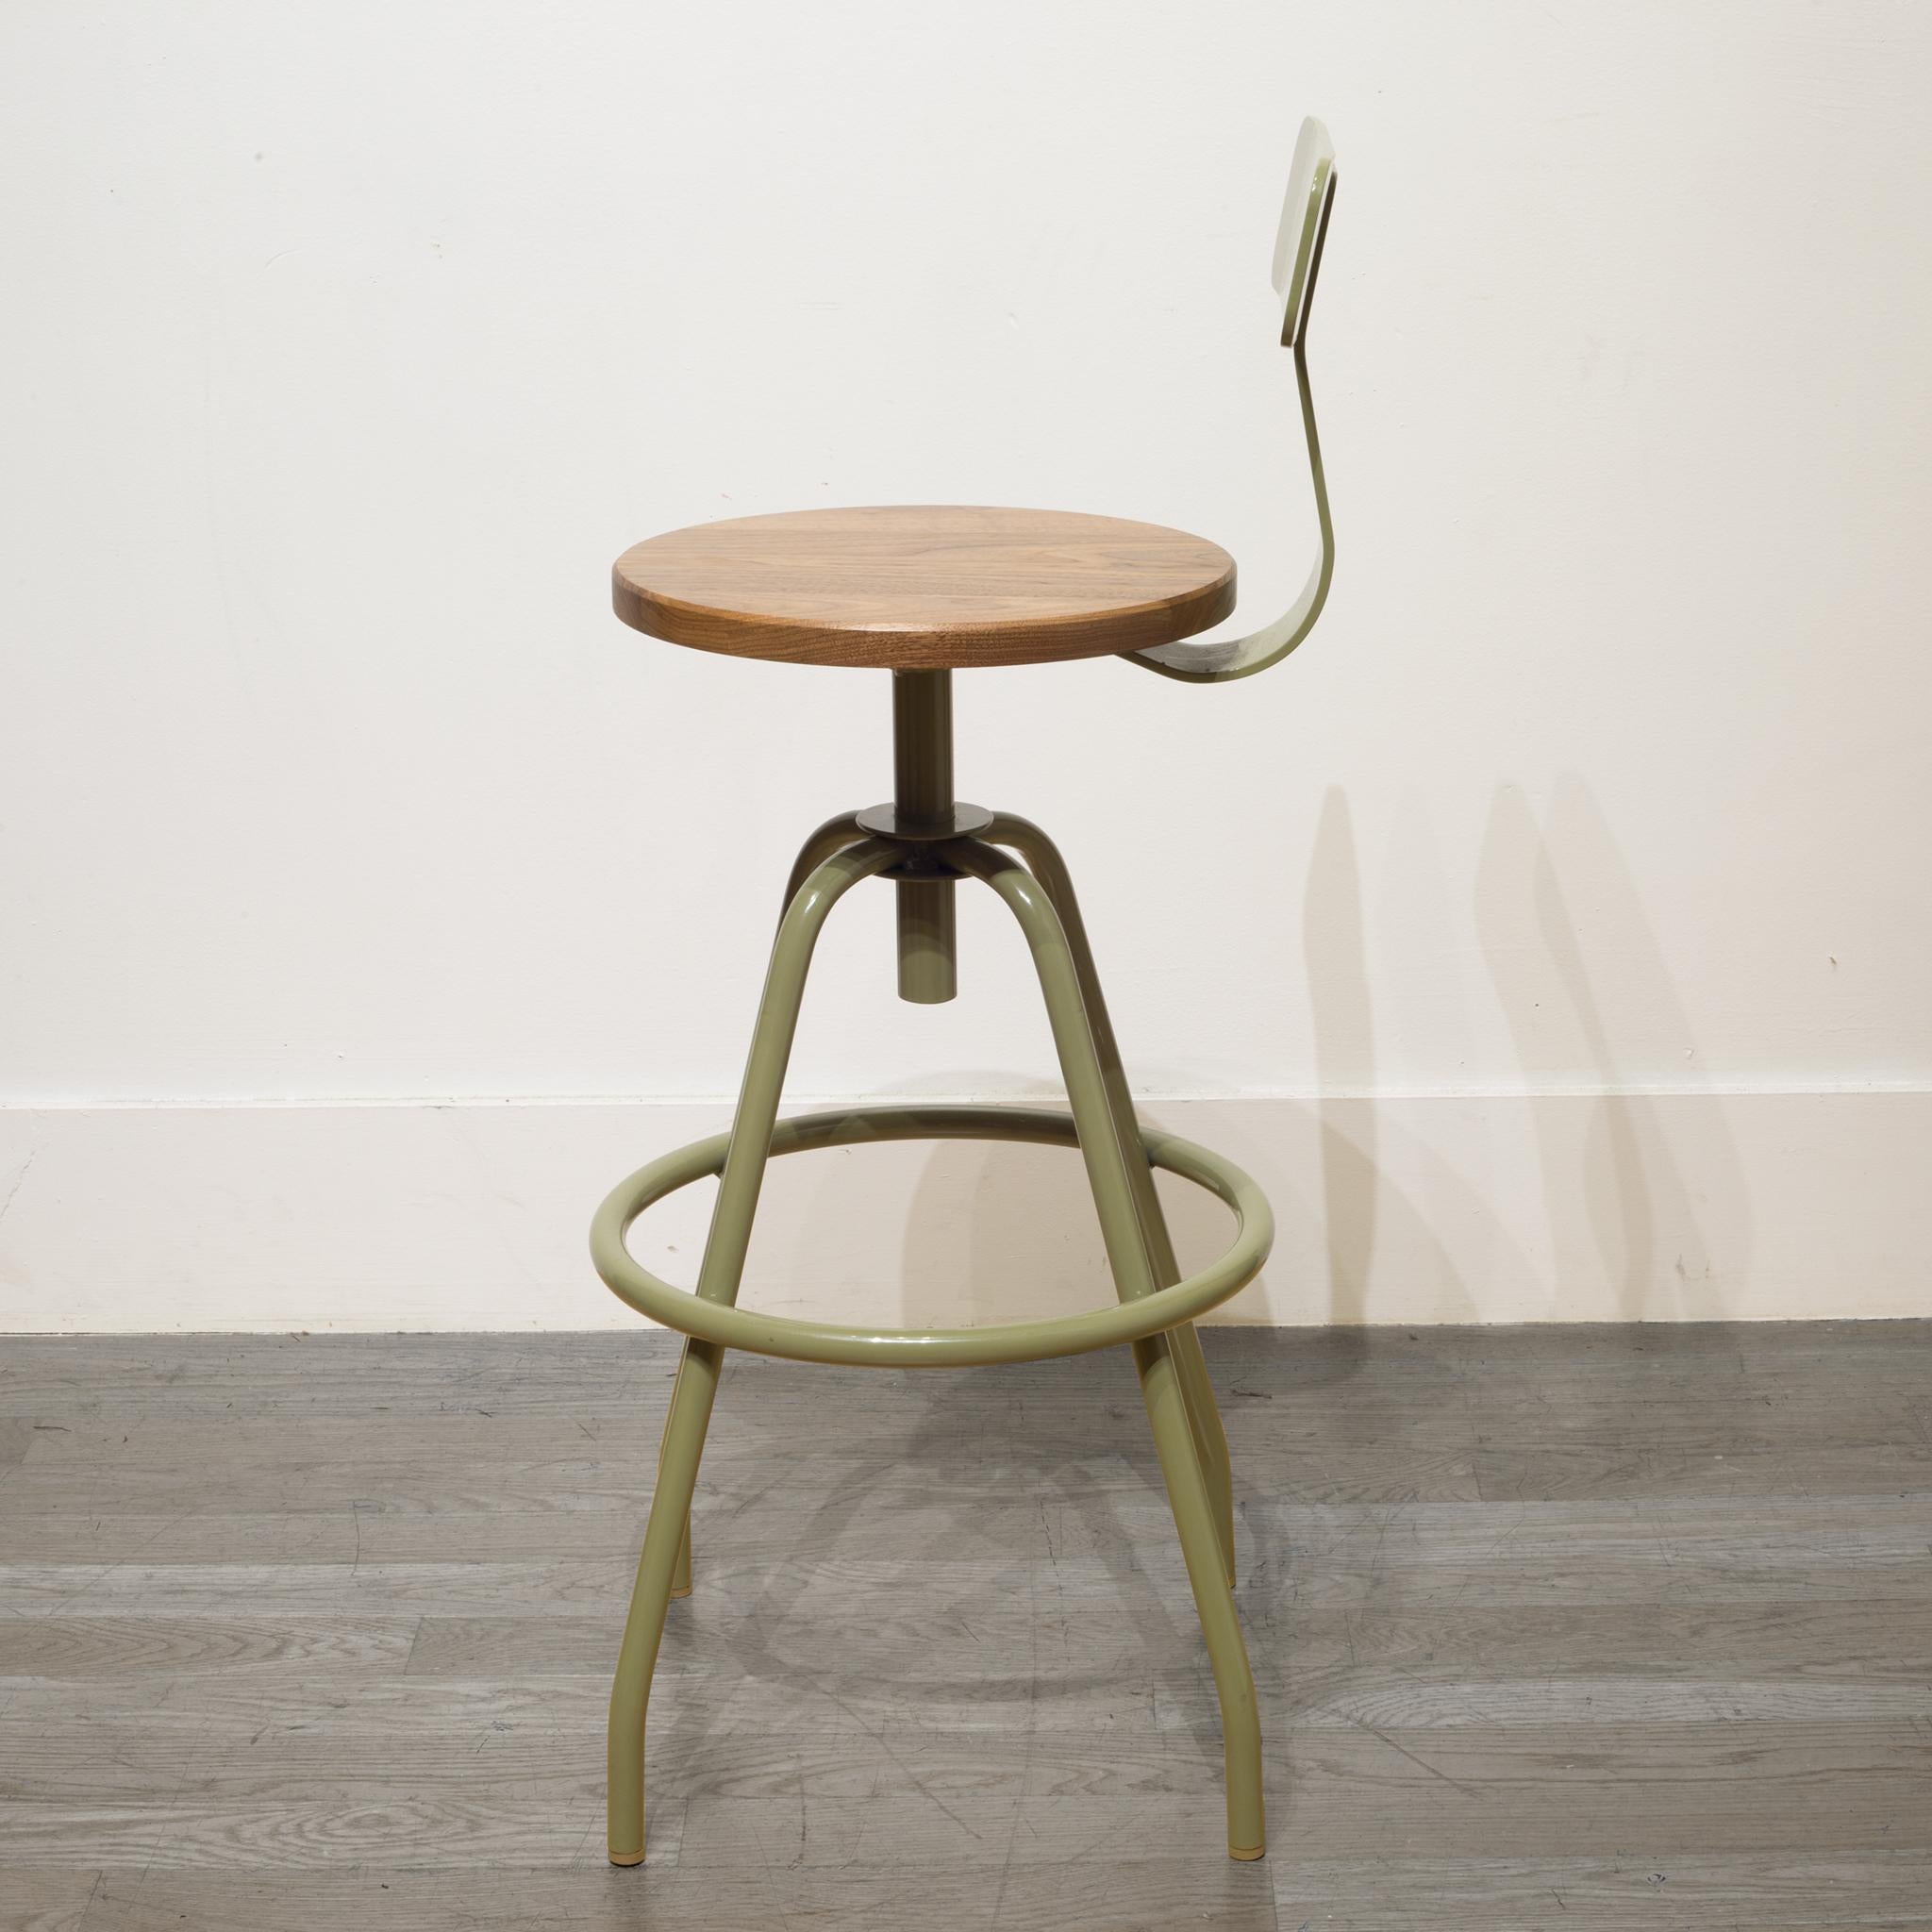 About

This is an original flat-cut, powder coated heavy steel stool in reed green with black walnut seat. Swivel seat.

Creator: Makr.
Date of manufacture: circa 2019.
Materials and techniques: Steel, black walnut.
Condition: New. Minor marks on